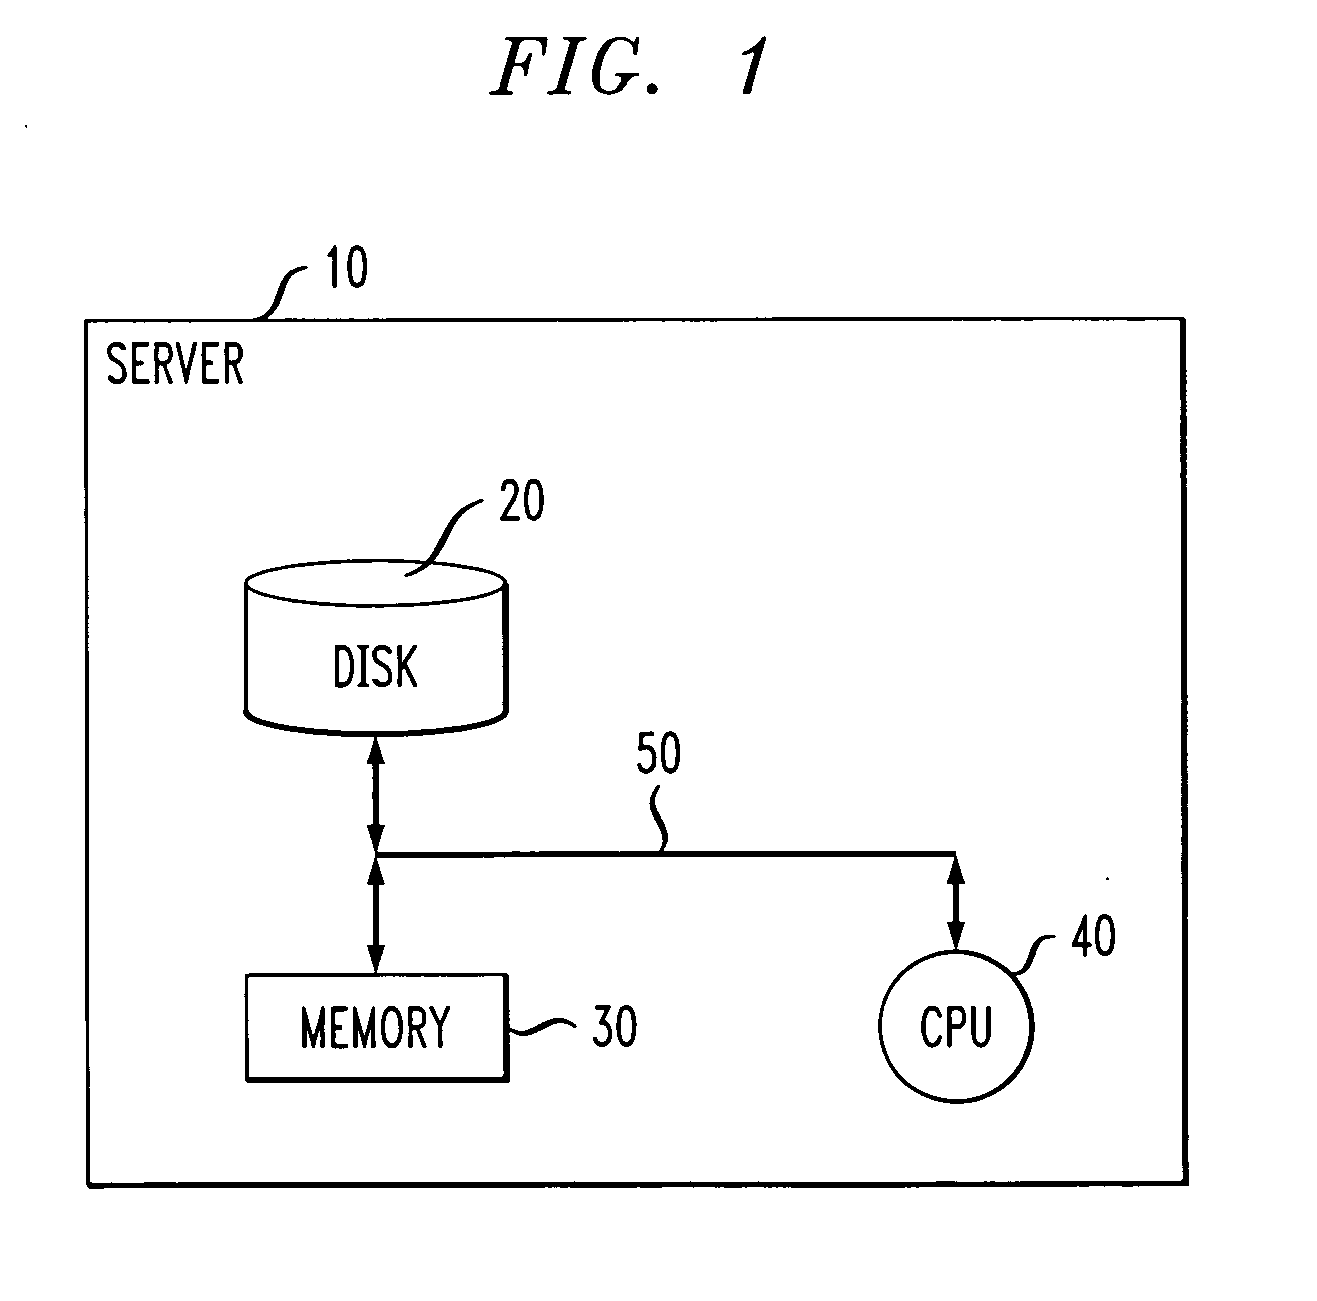 Performance degradation root cause prediction in a distributed computing system